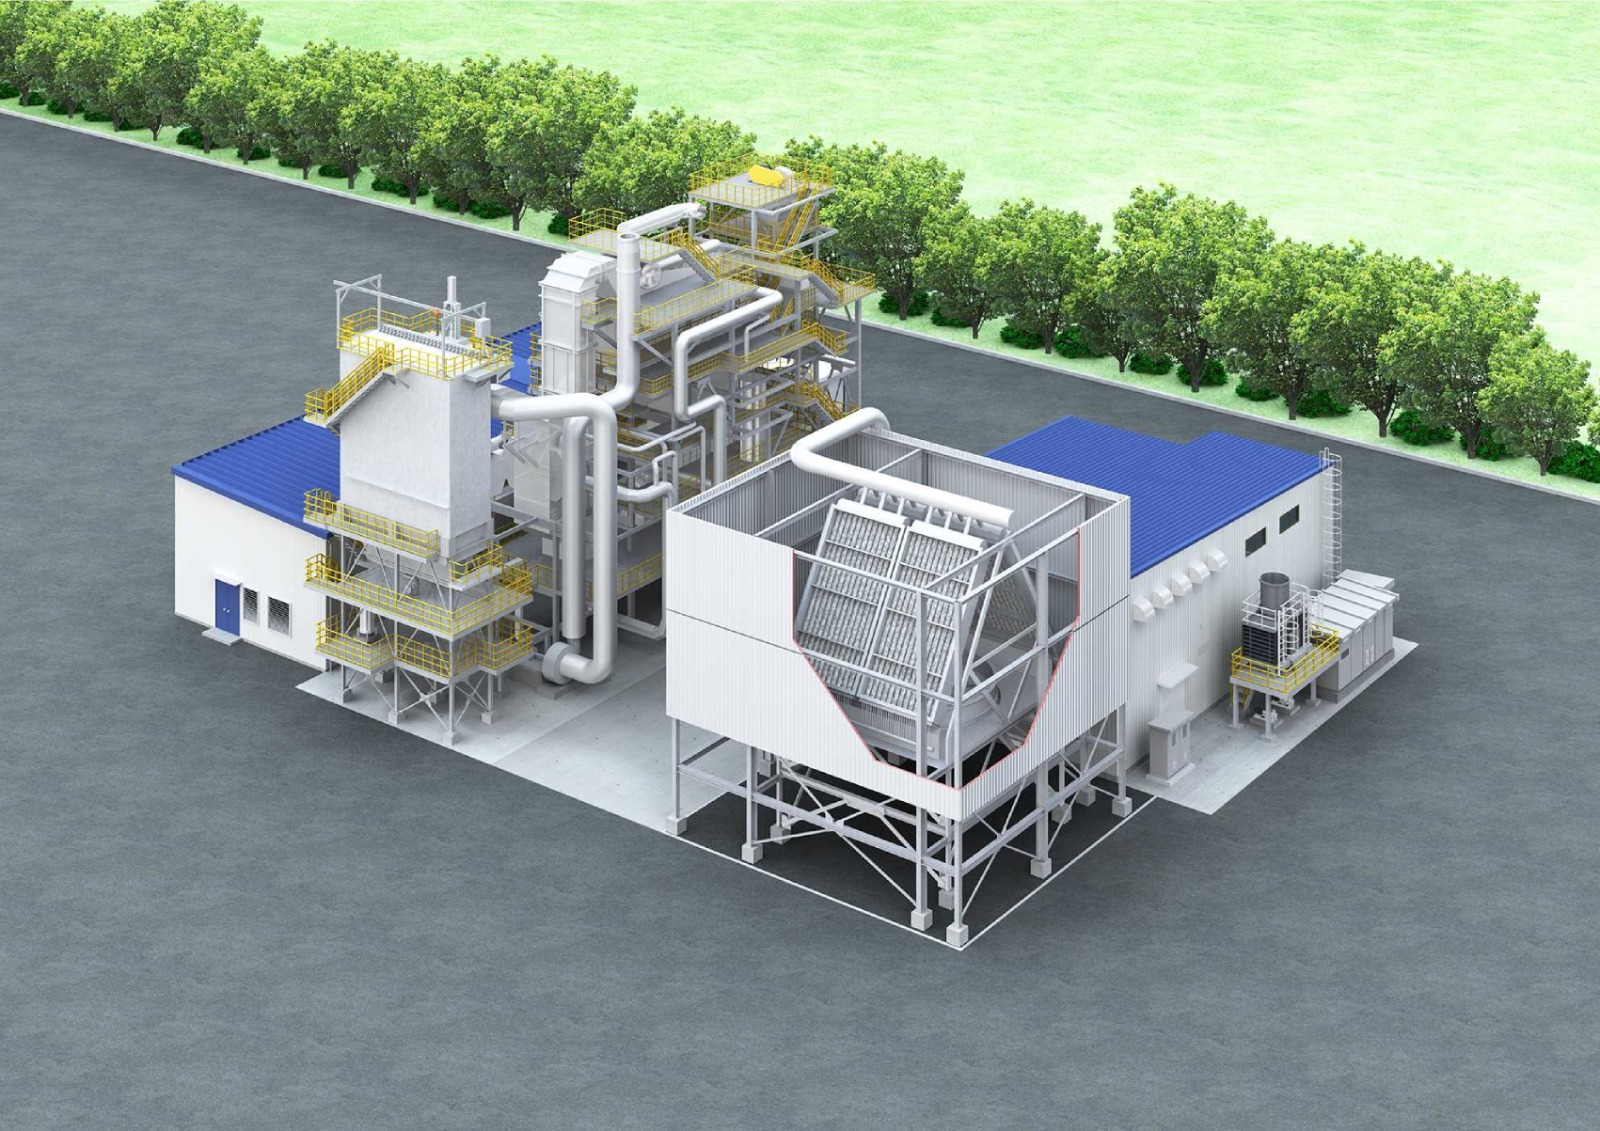 Epson Plans Construction of its First Biomass Power Plant